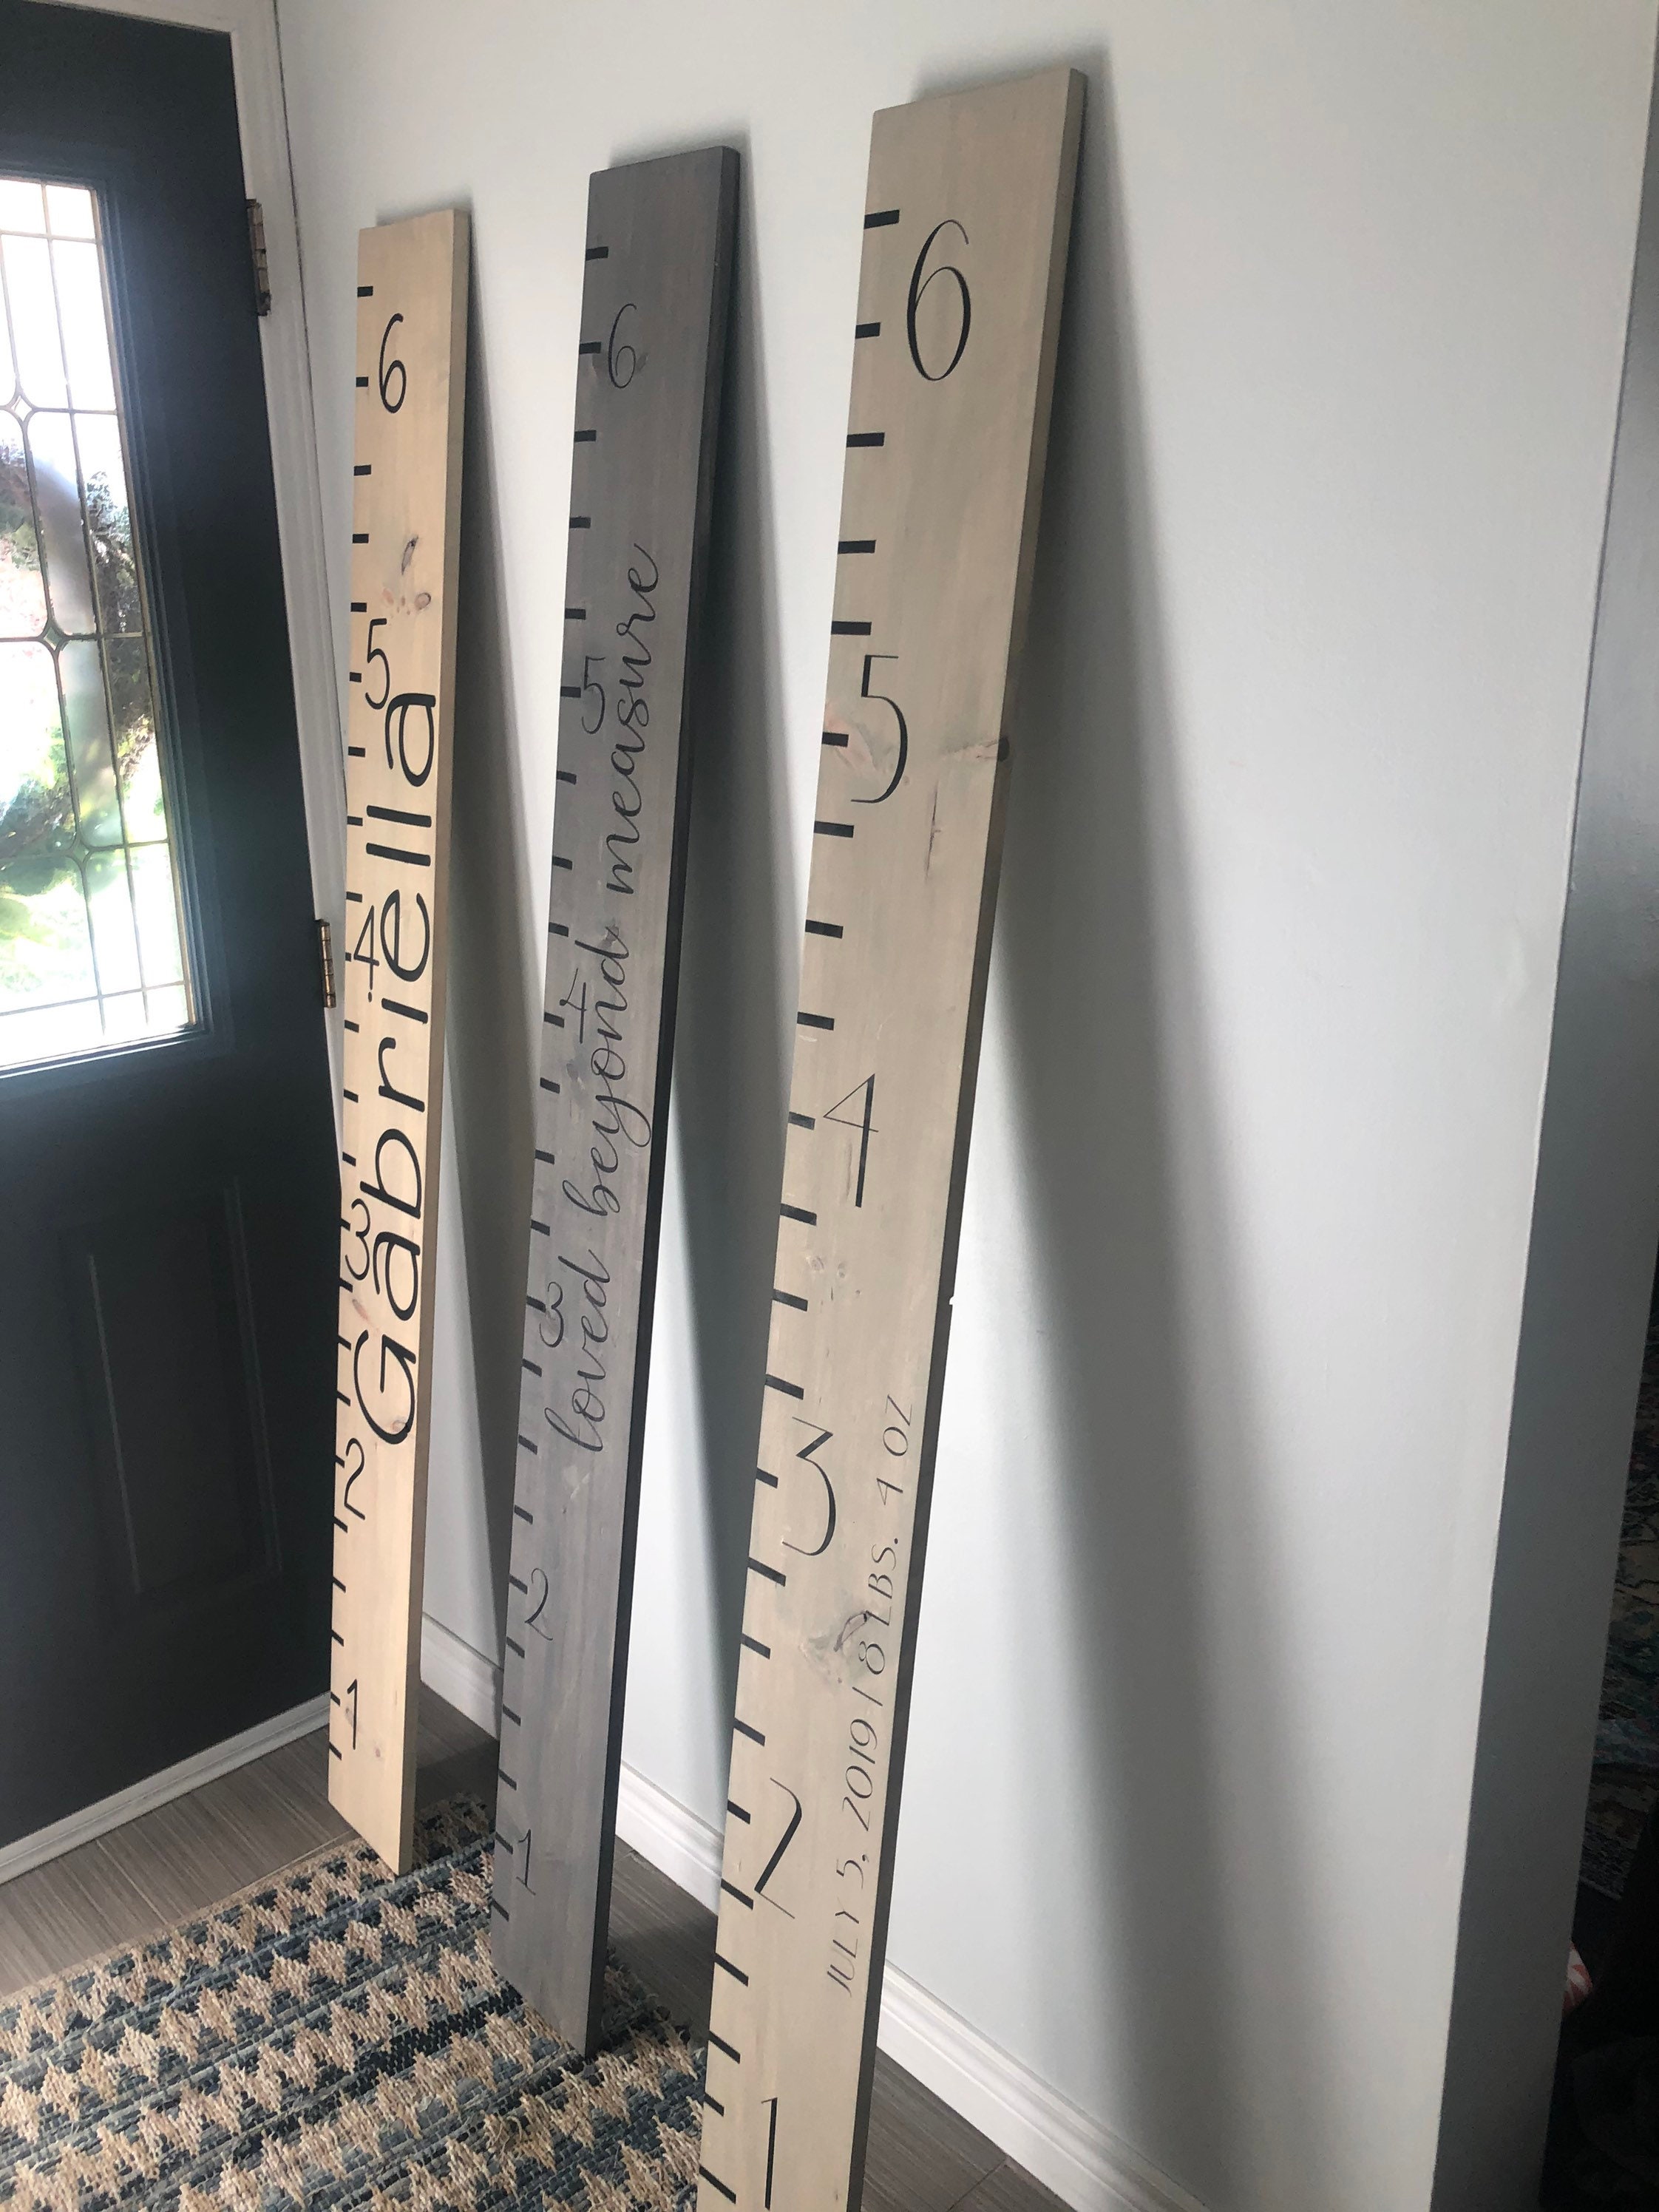 Distressed Giant Ruler Height Chart ,wooden Growth Chart, Height